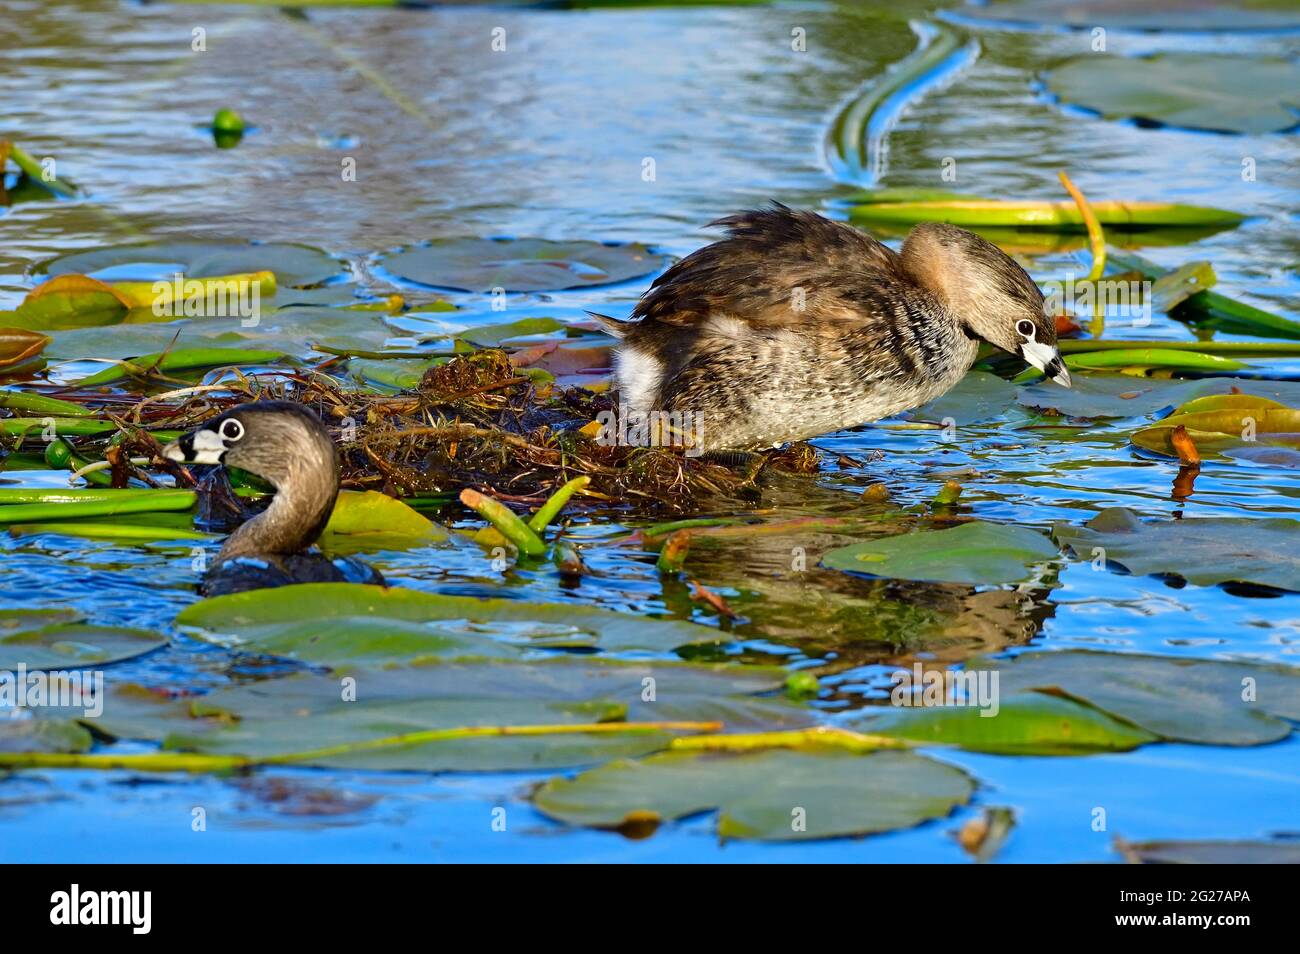 Two Pied-billed Grebes 'Podilymbus podiceps'; building  a floating nest made of lilly pads at the marshy area in a rural Alberta Lake Stock Photo